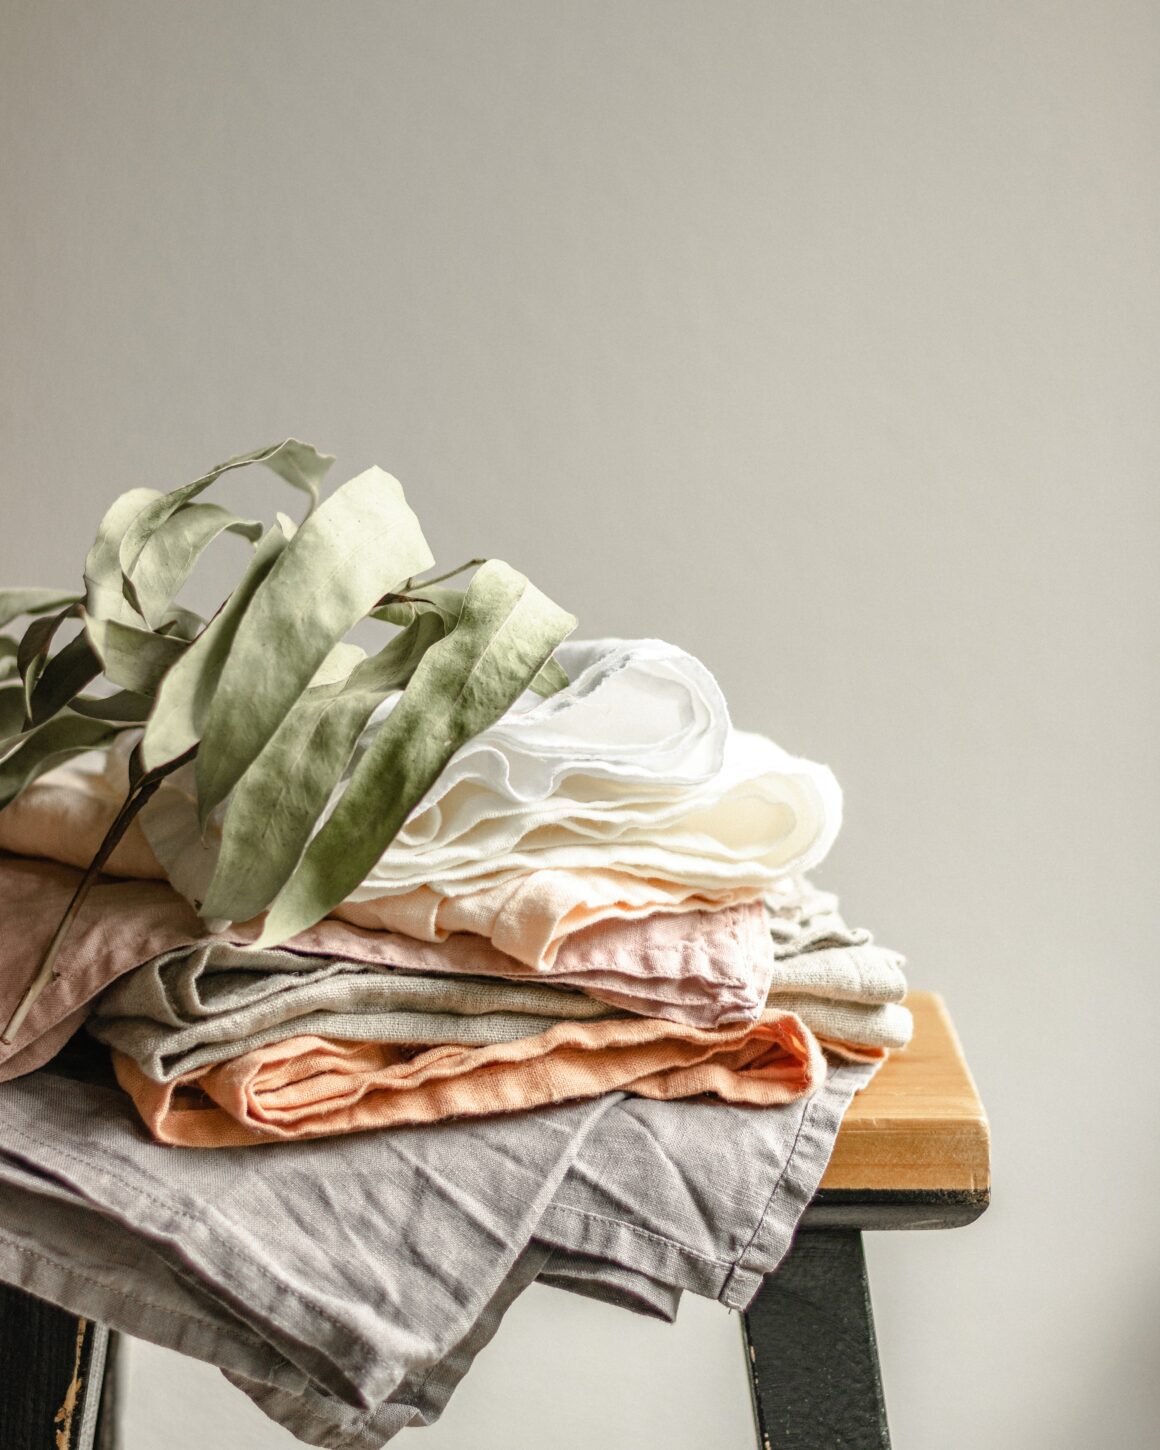 19 Sustainable Fabrics For A Conscious Closet